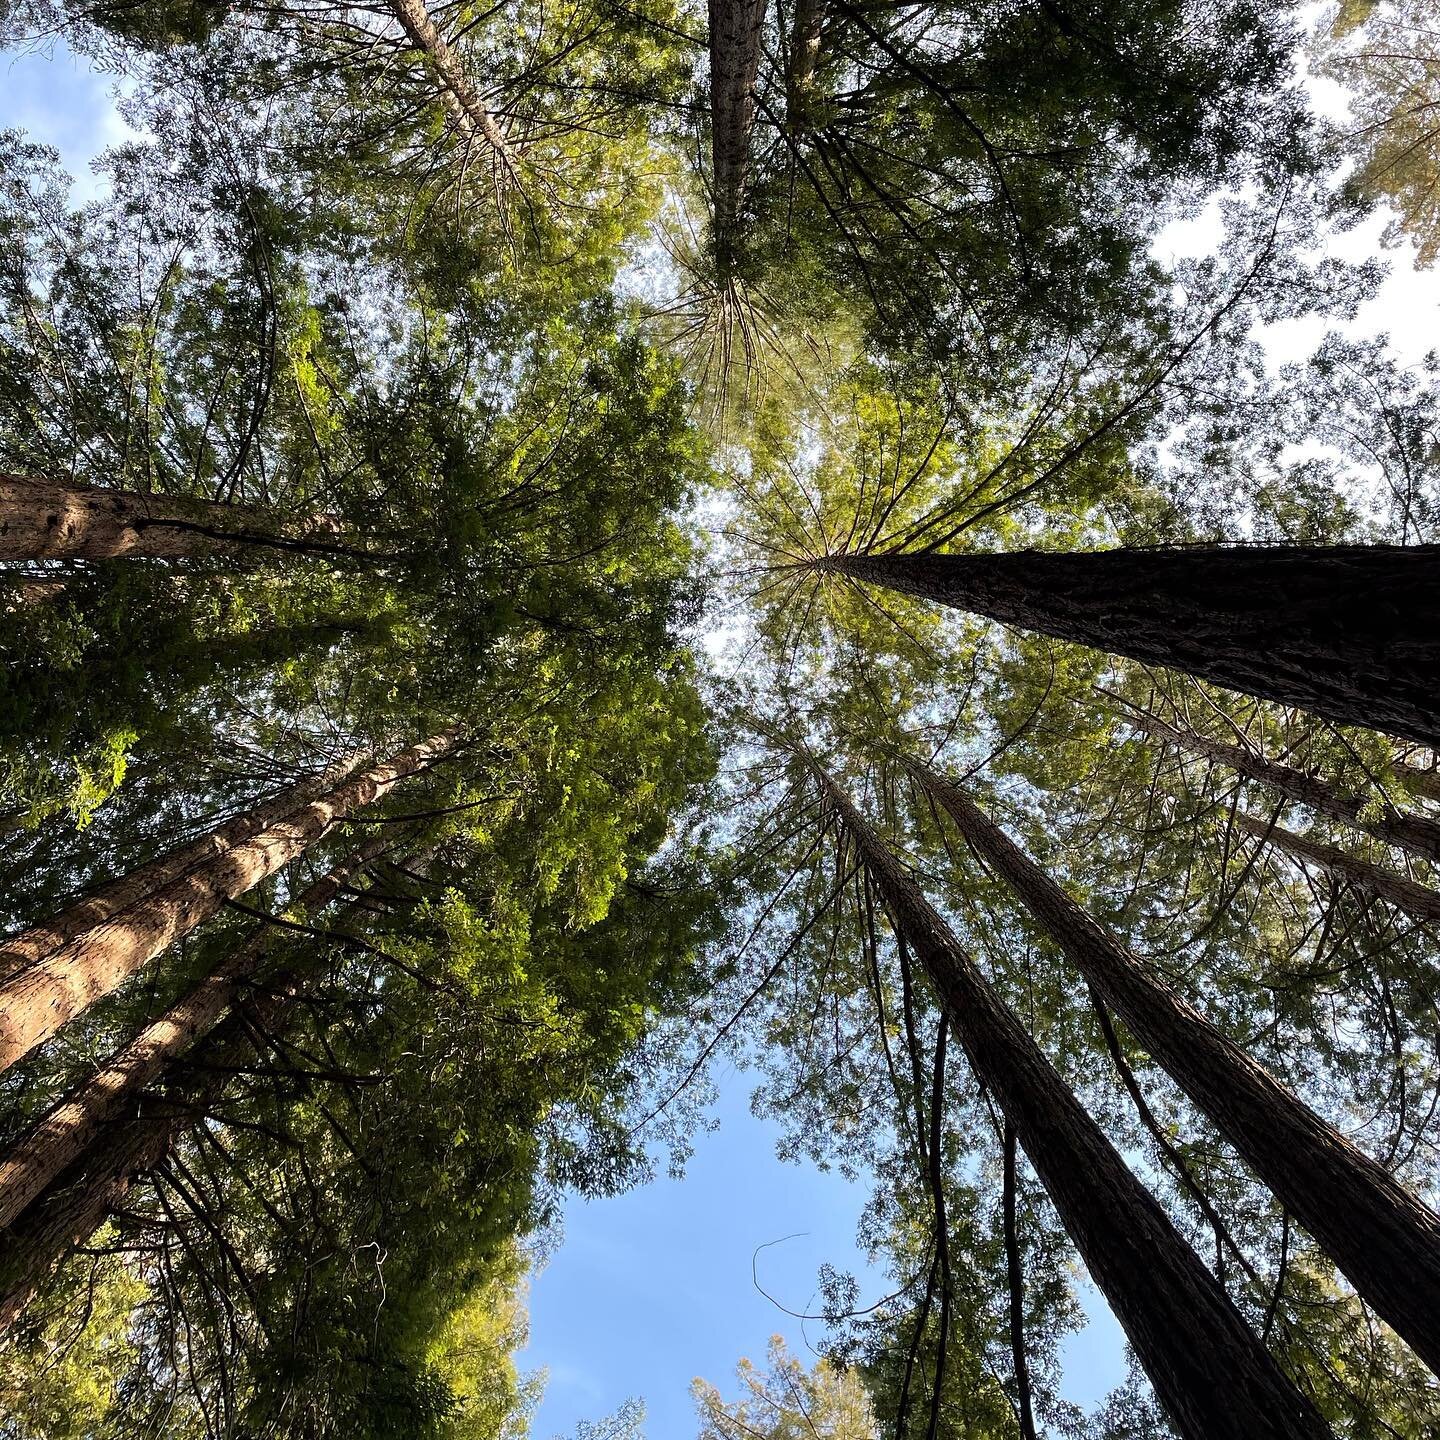 A local wastewater expert has highlighted major new concerns with the Silver Estates Timber Harvest Plan (THP) near Guerneville. 

Robert Rawson, a former supervisor at the Russian River County Sanitation District (RRCSD) with over 40 years experienc